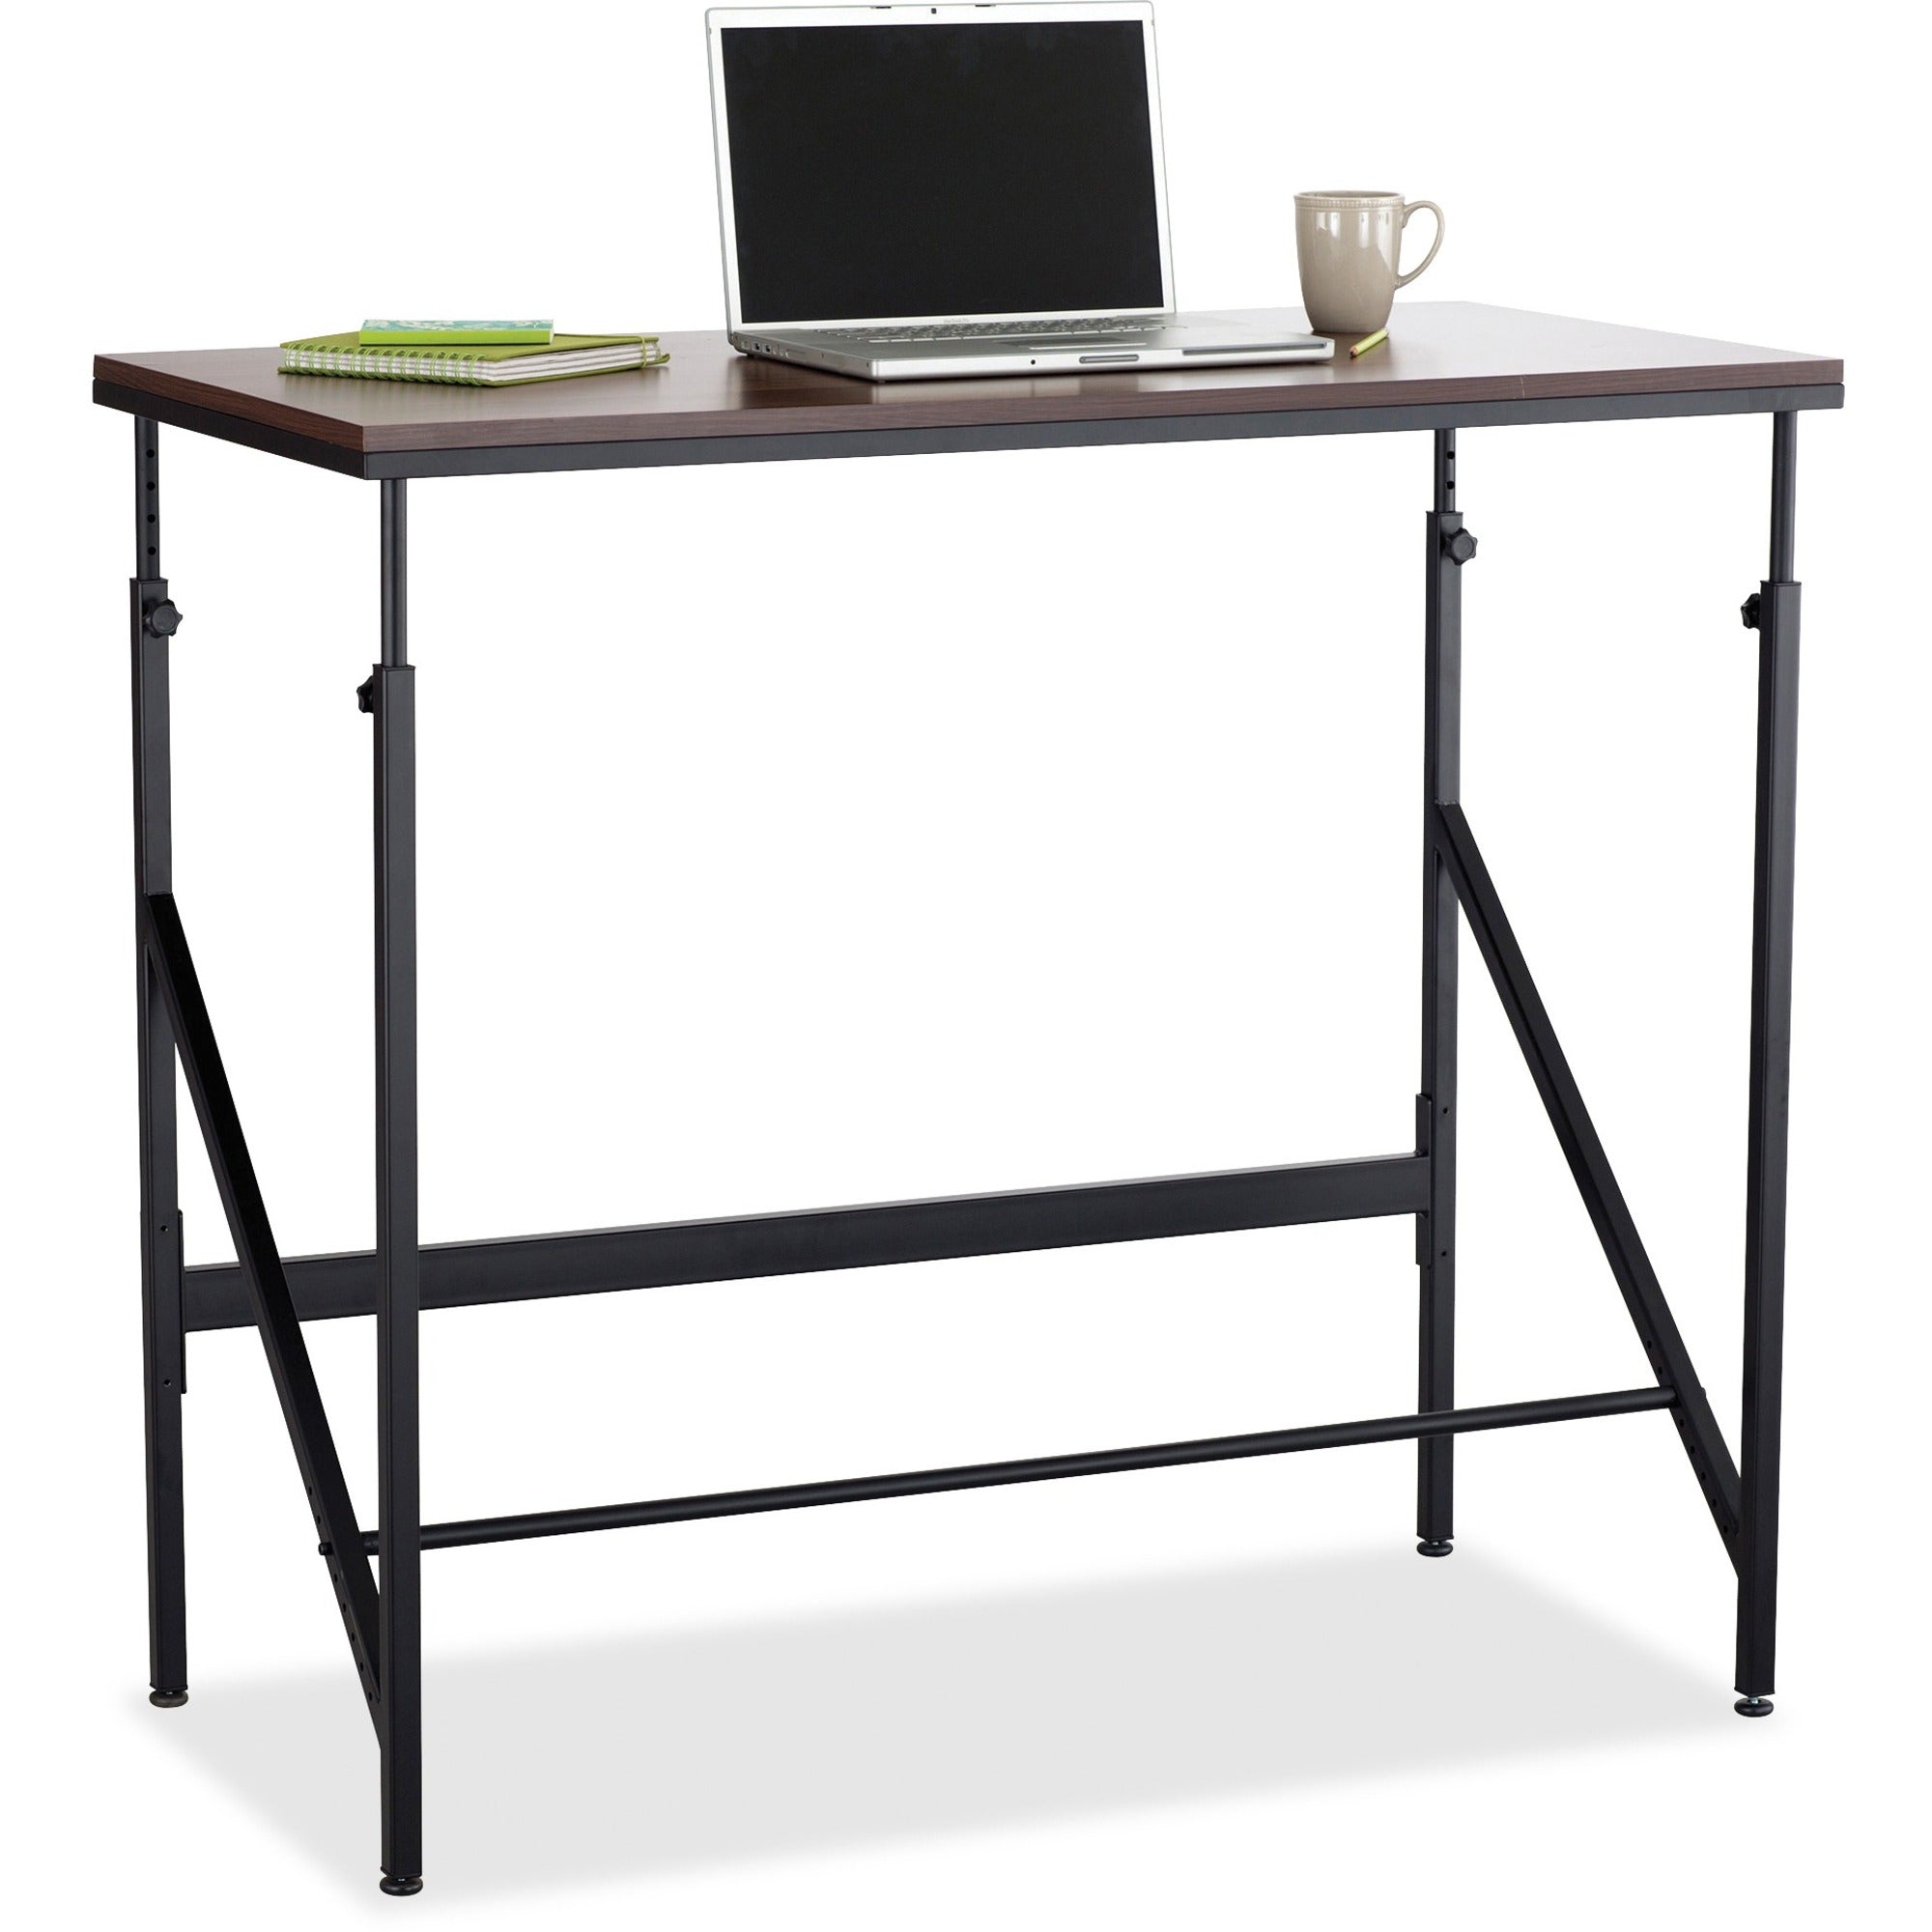 Safco Laminate Tabletop Standing-Height Desk - For - Table TopMelamine Laminate Rectangle, Walnut Top - Powder Coated Base - Adjustable Height - 38" to 50" Adjustment x 48" Table Top Width x 24" Table Top Depth - 50" Height - Assembly Required - Blac